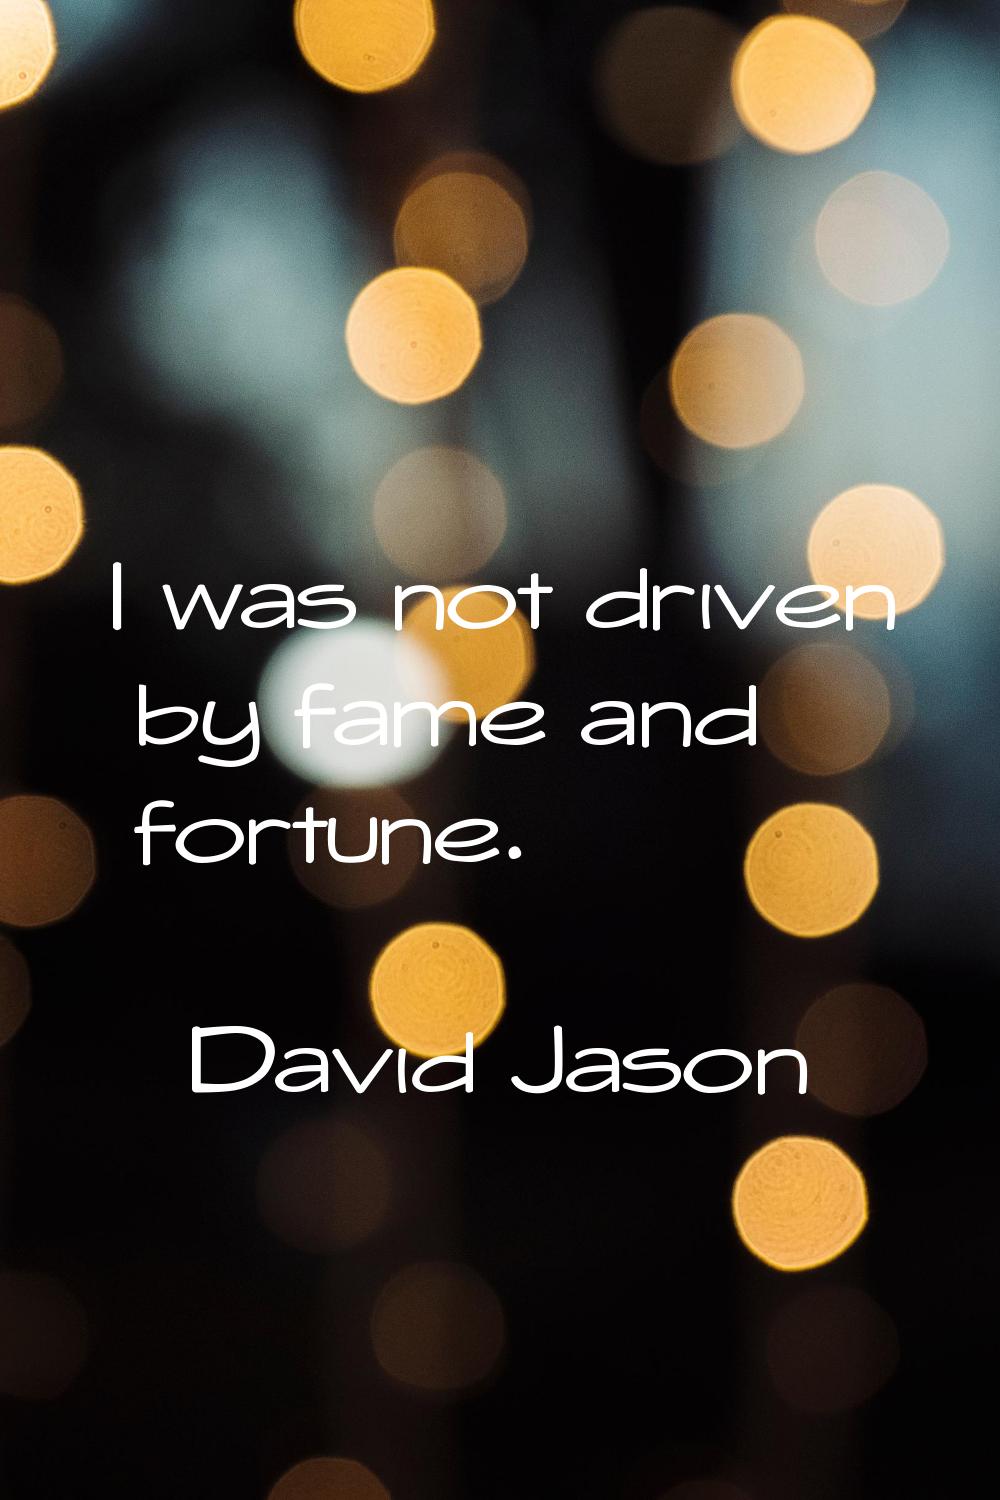 I was not driven by fame and fortune.